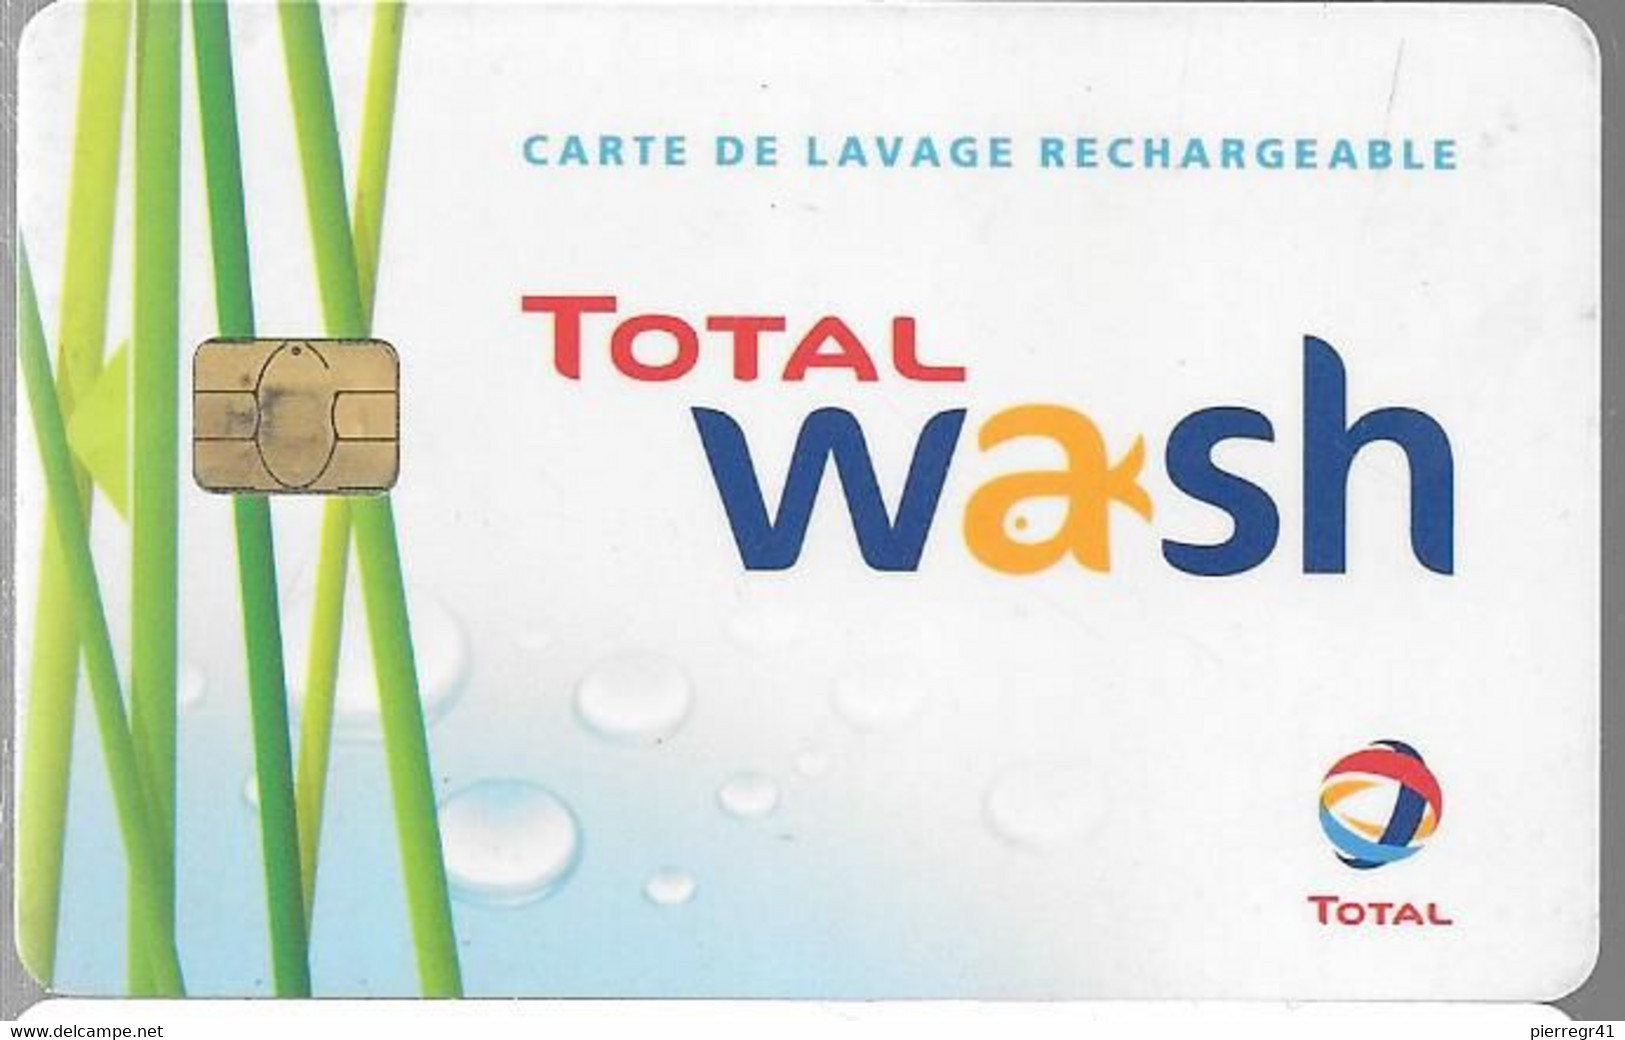 CARTE-PUCE-RECHARGEABLE-LAVAGE-TOTAL WASH-TBE - Car Wash Cards